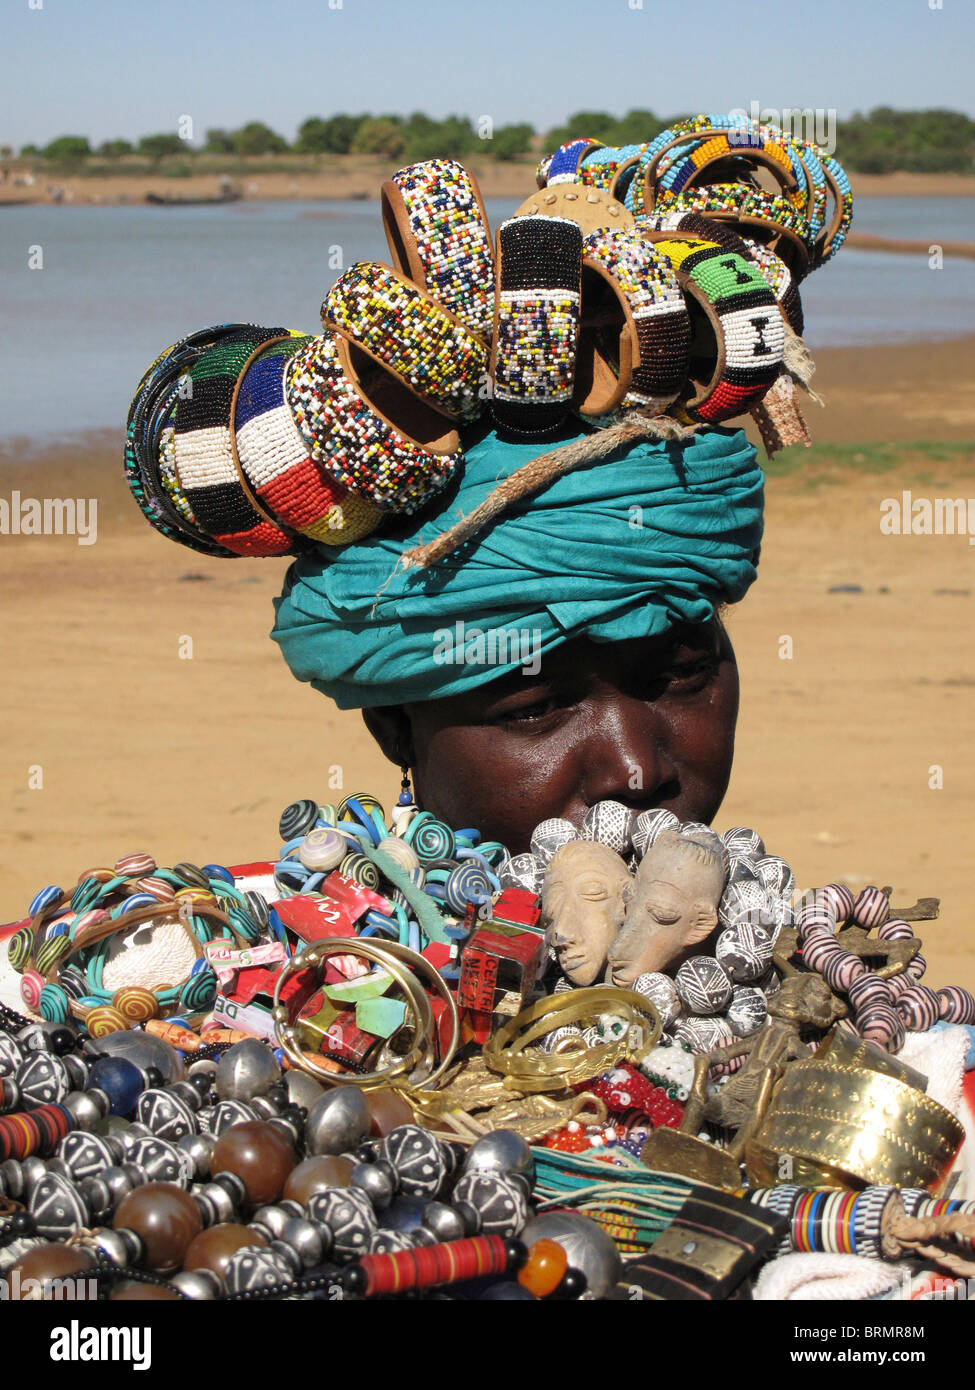 An African woman selling beaded necklaces and bracelets that she is balancing on her head Stock Photo